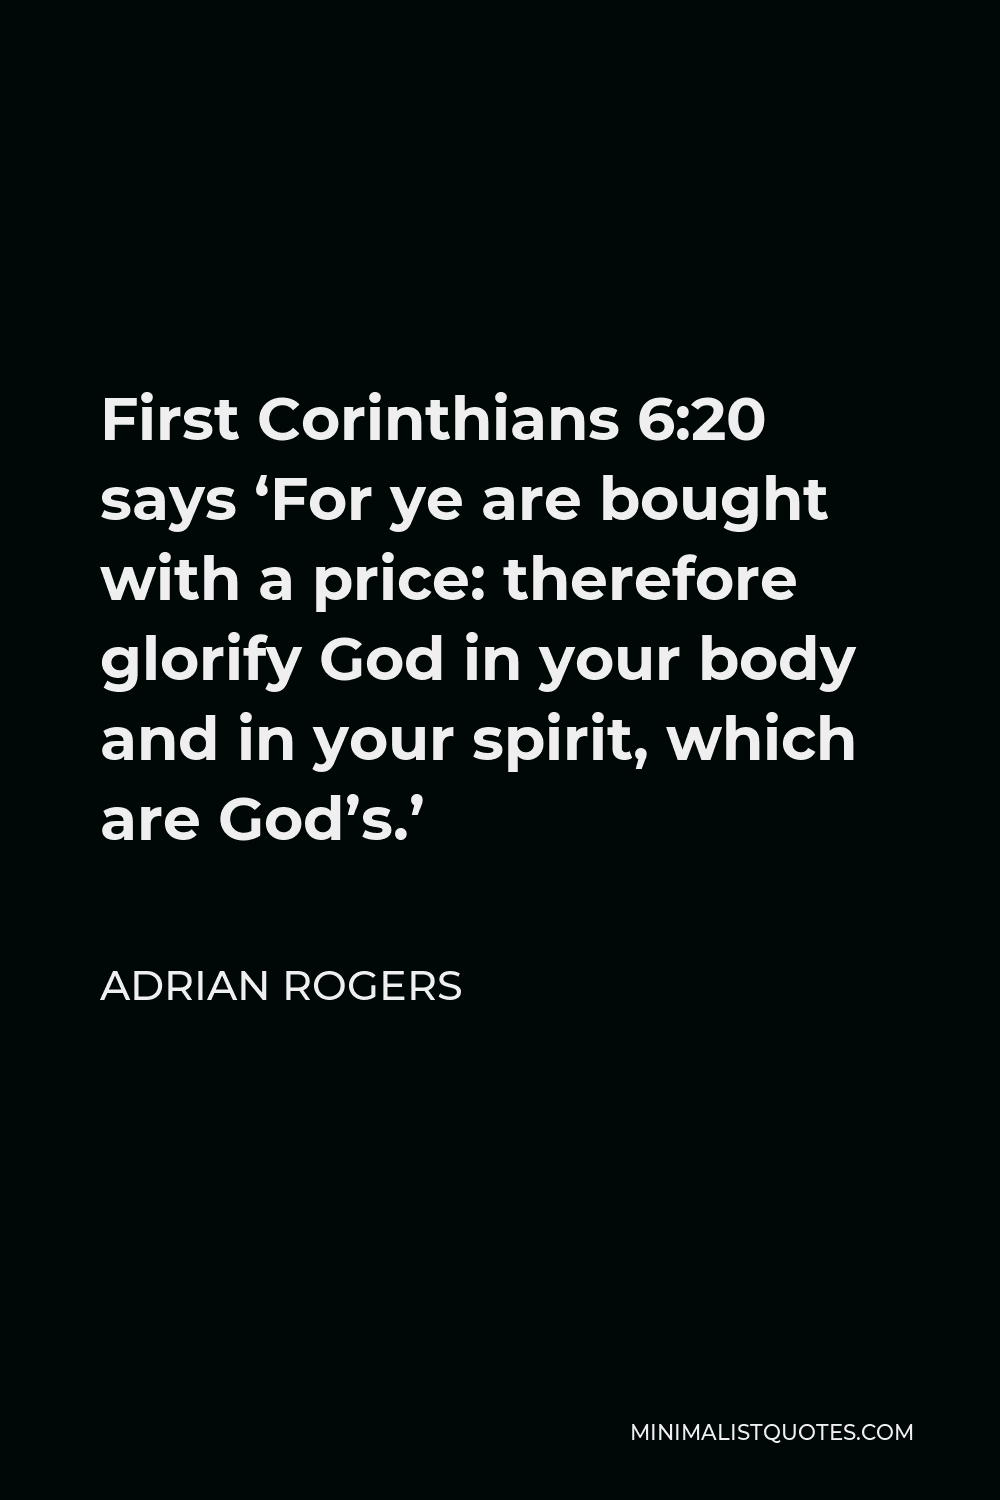 Adrian Rogers Quote - First Corinthians 6:20 says ‘For ye are bought with a price: therefore glorify God in your body and in your spirit, which are God’s.’